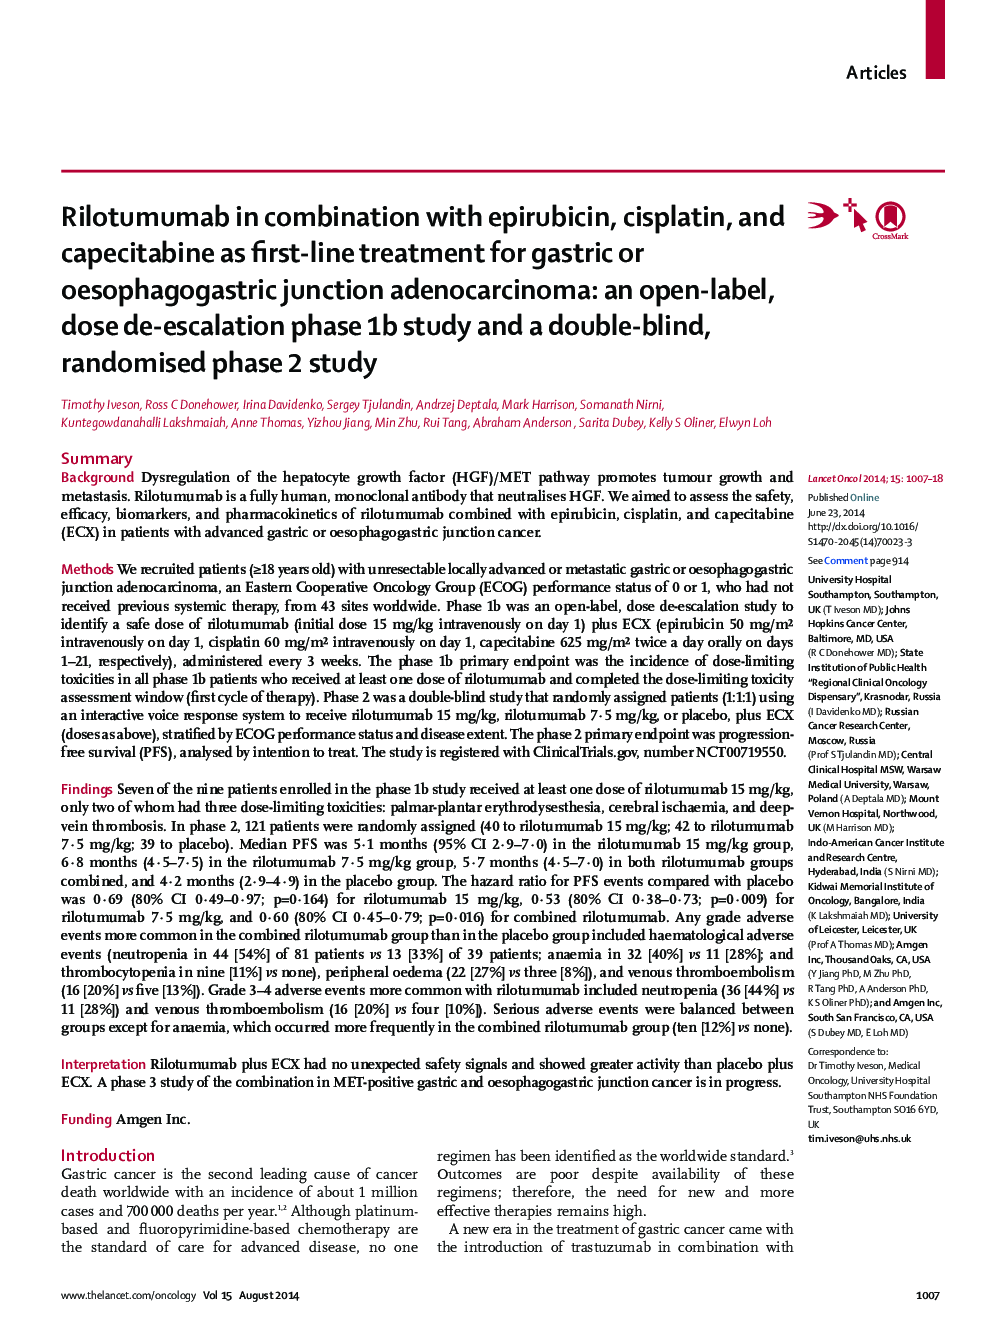 Rilotumumab in combination with epirubicin, cisplatin, and capecitabine as first-line treatment for gastric or oesophagogastric junction adenocarcinoma: an open-label, dose de-escalation phase 1b study and a double-blind, randomised phase 2 study